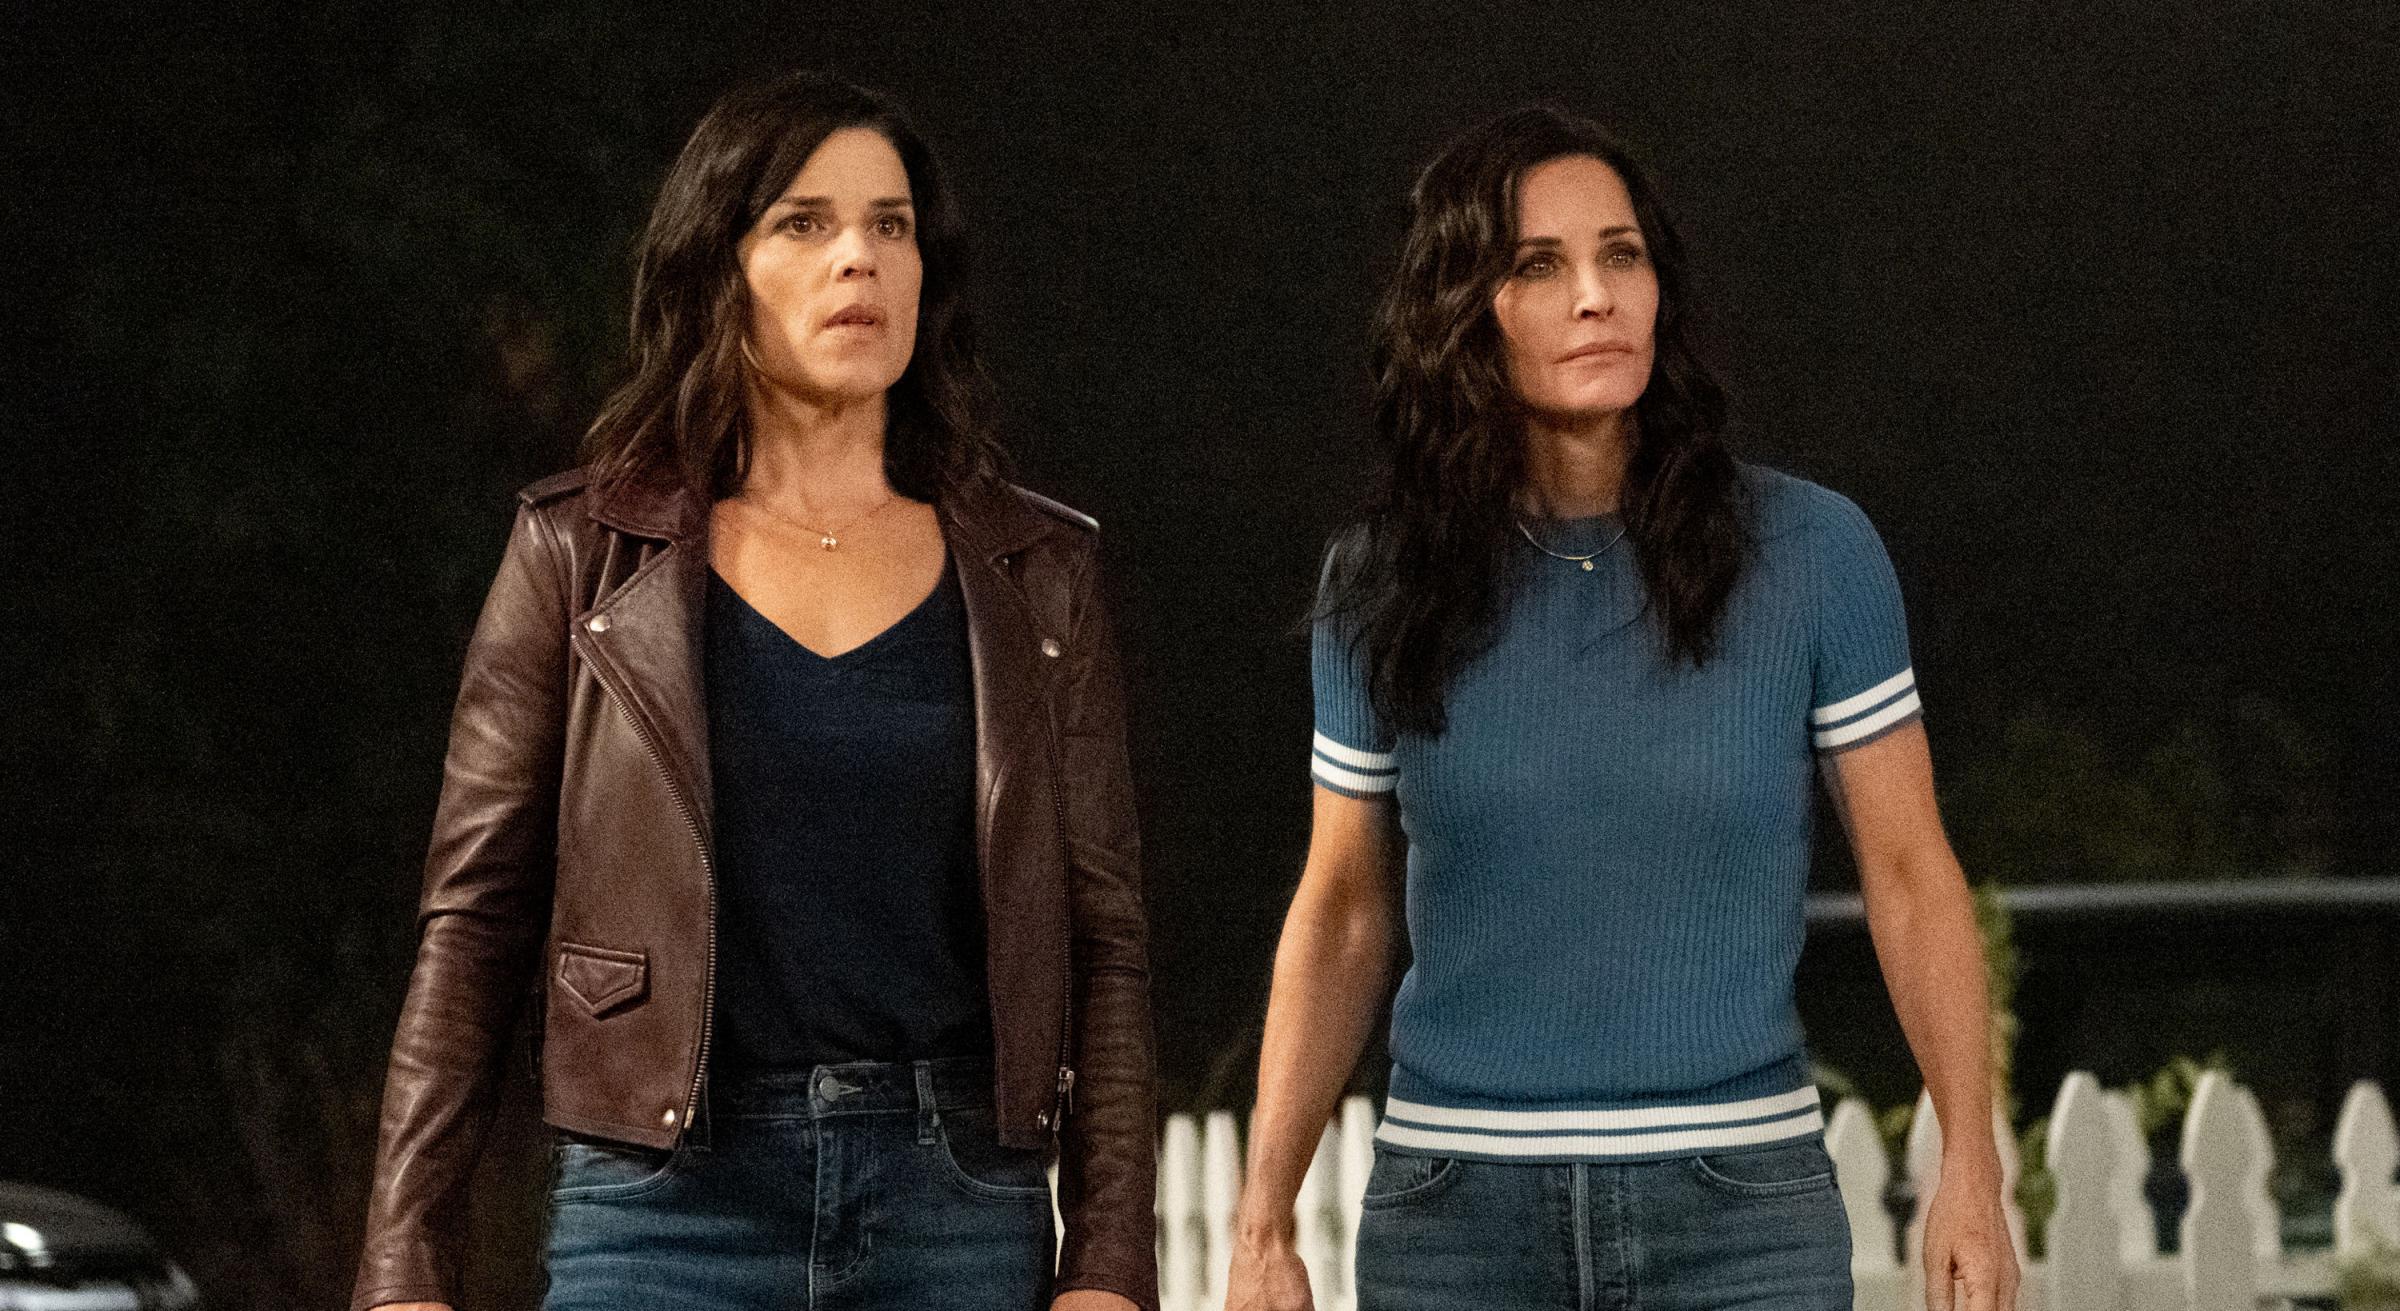 Undated film still handout from Scream. Pictured: Neve Campbell as Sidney Prescott and Courteney Cox as Gale Weathers. PA Feature SHOWBIZ Film Reviews. Picture credit should read: PA Photo/Paramount Pictures/Brownie Harris. All Rights Reserved. WARNING: